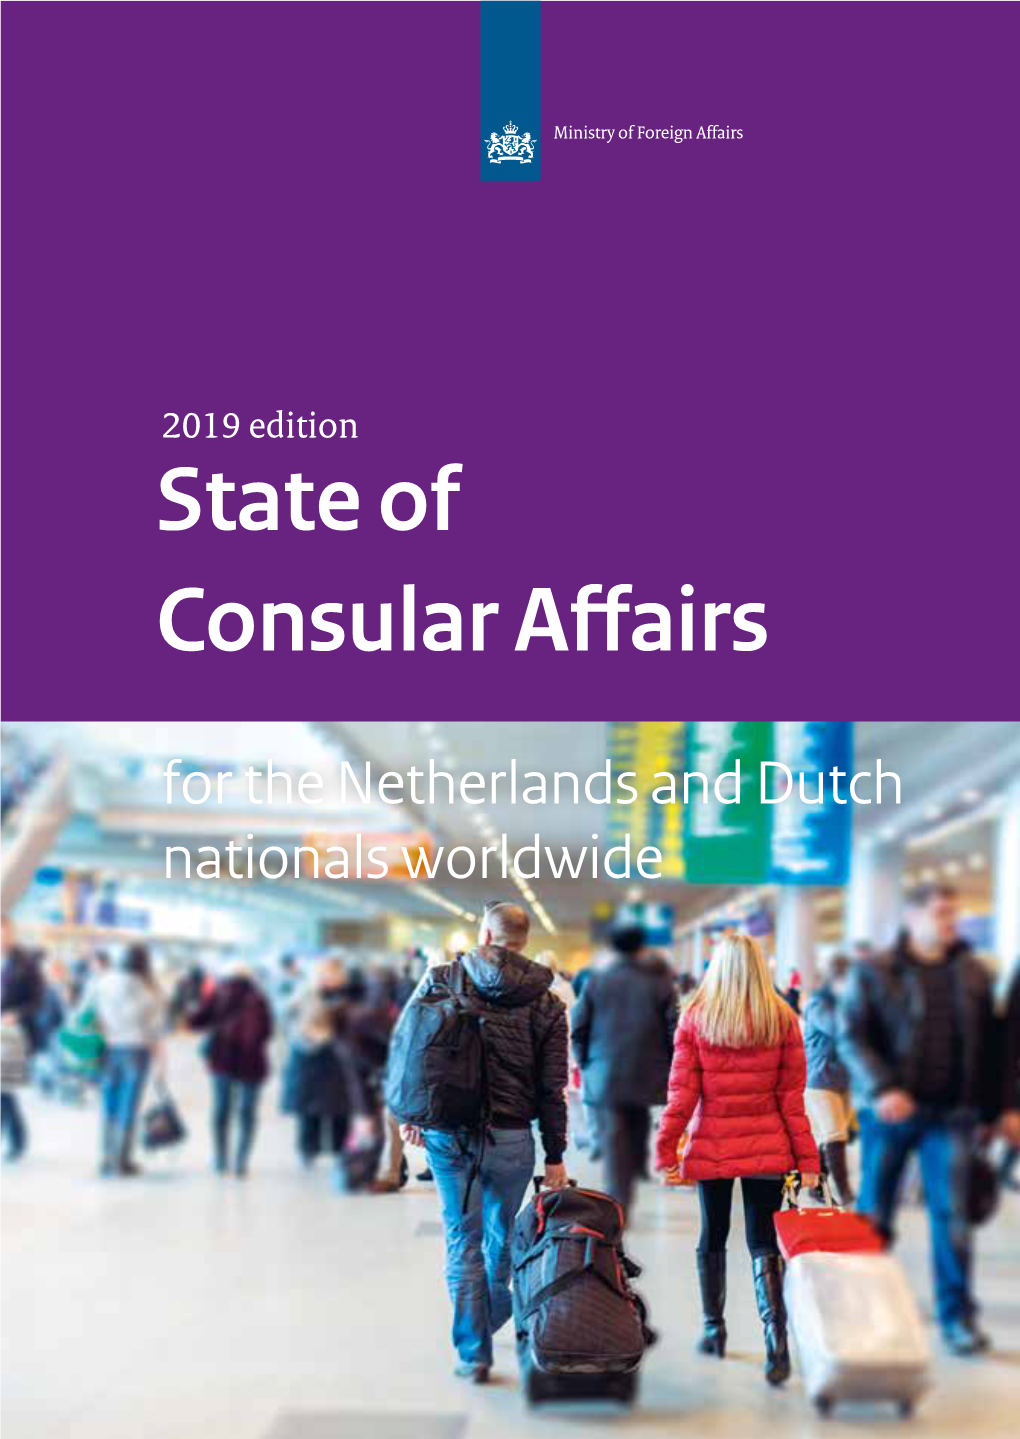 The State of Consular Affairs